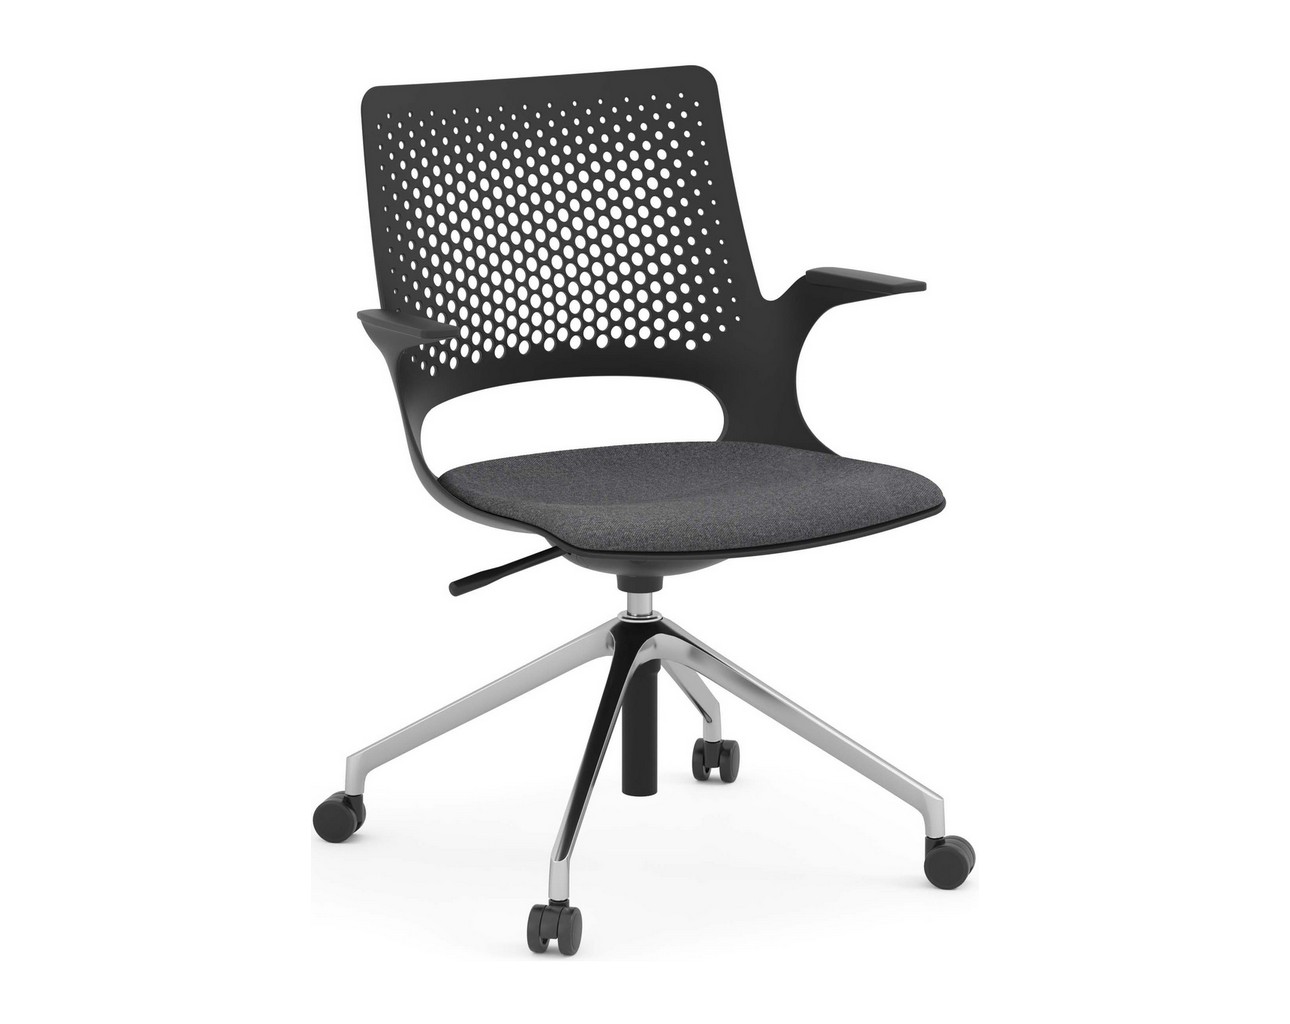 Harmony Multi-Purpose Chair – Polished Aluminum Base and Black Frame with Grey Seat